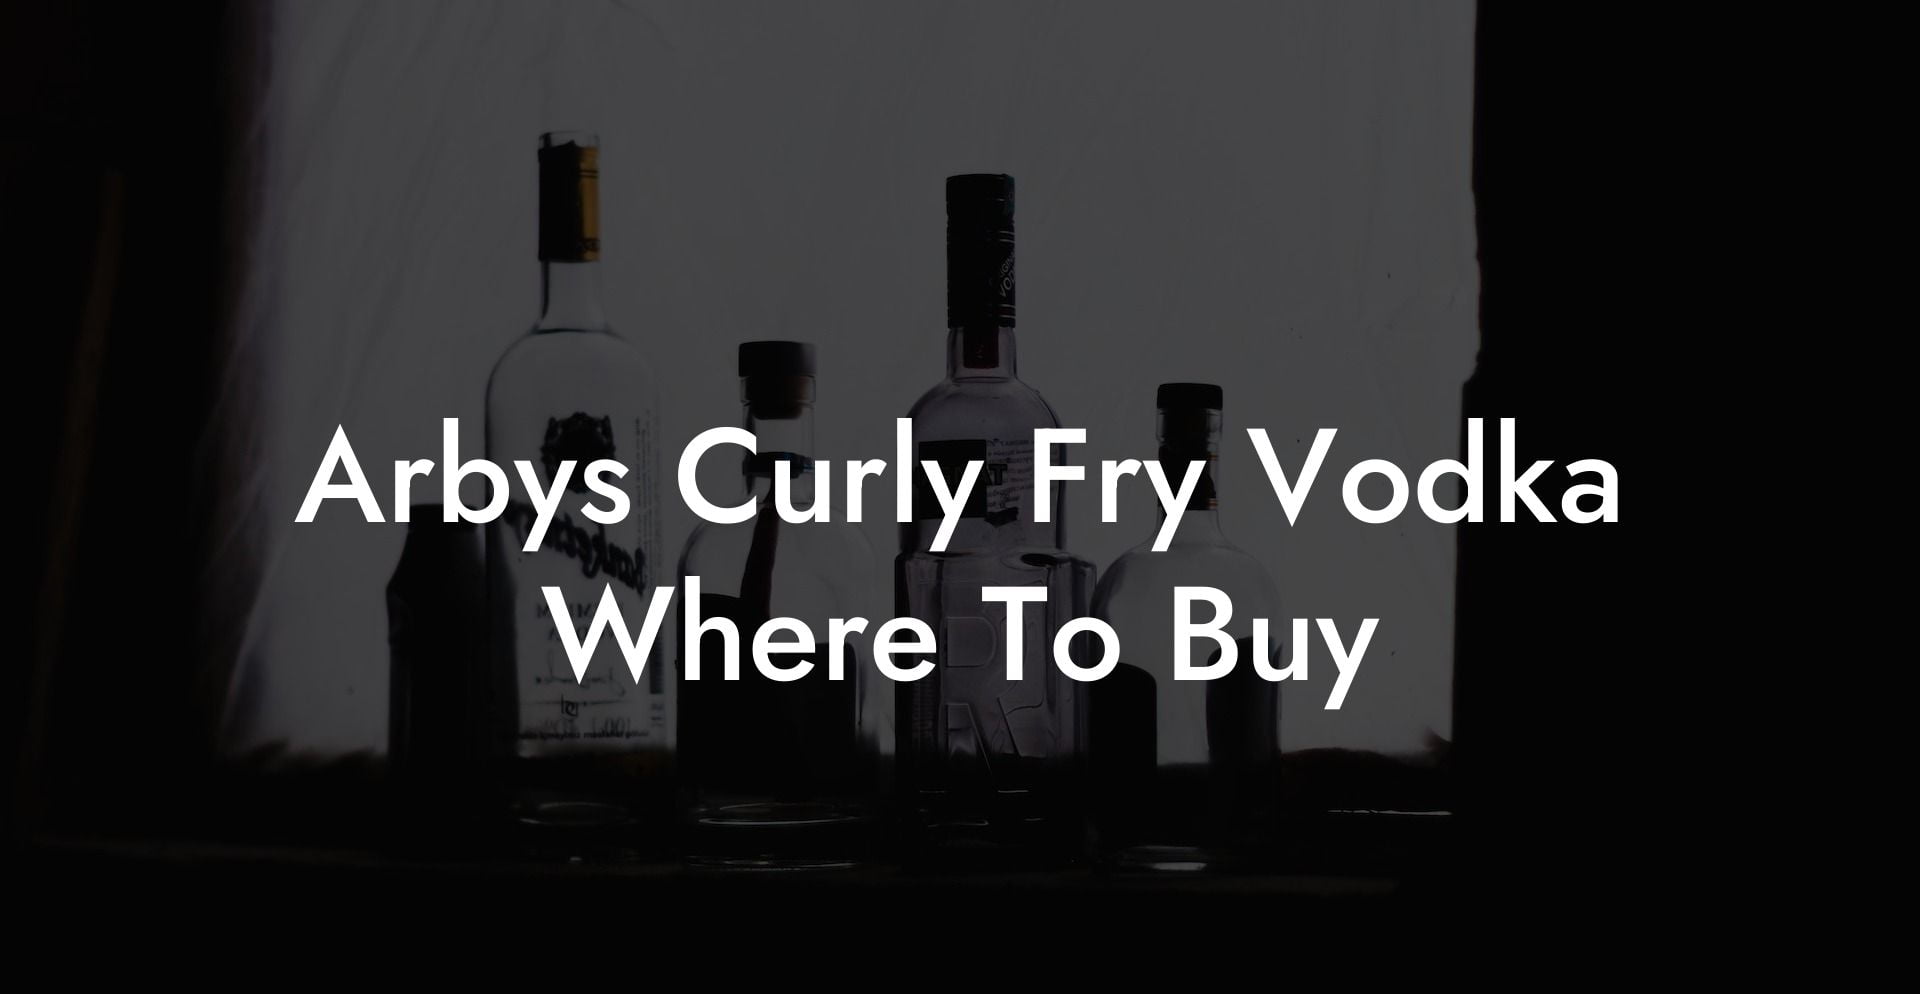 Arbys Curly Fry Vodka Where To Buy